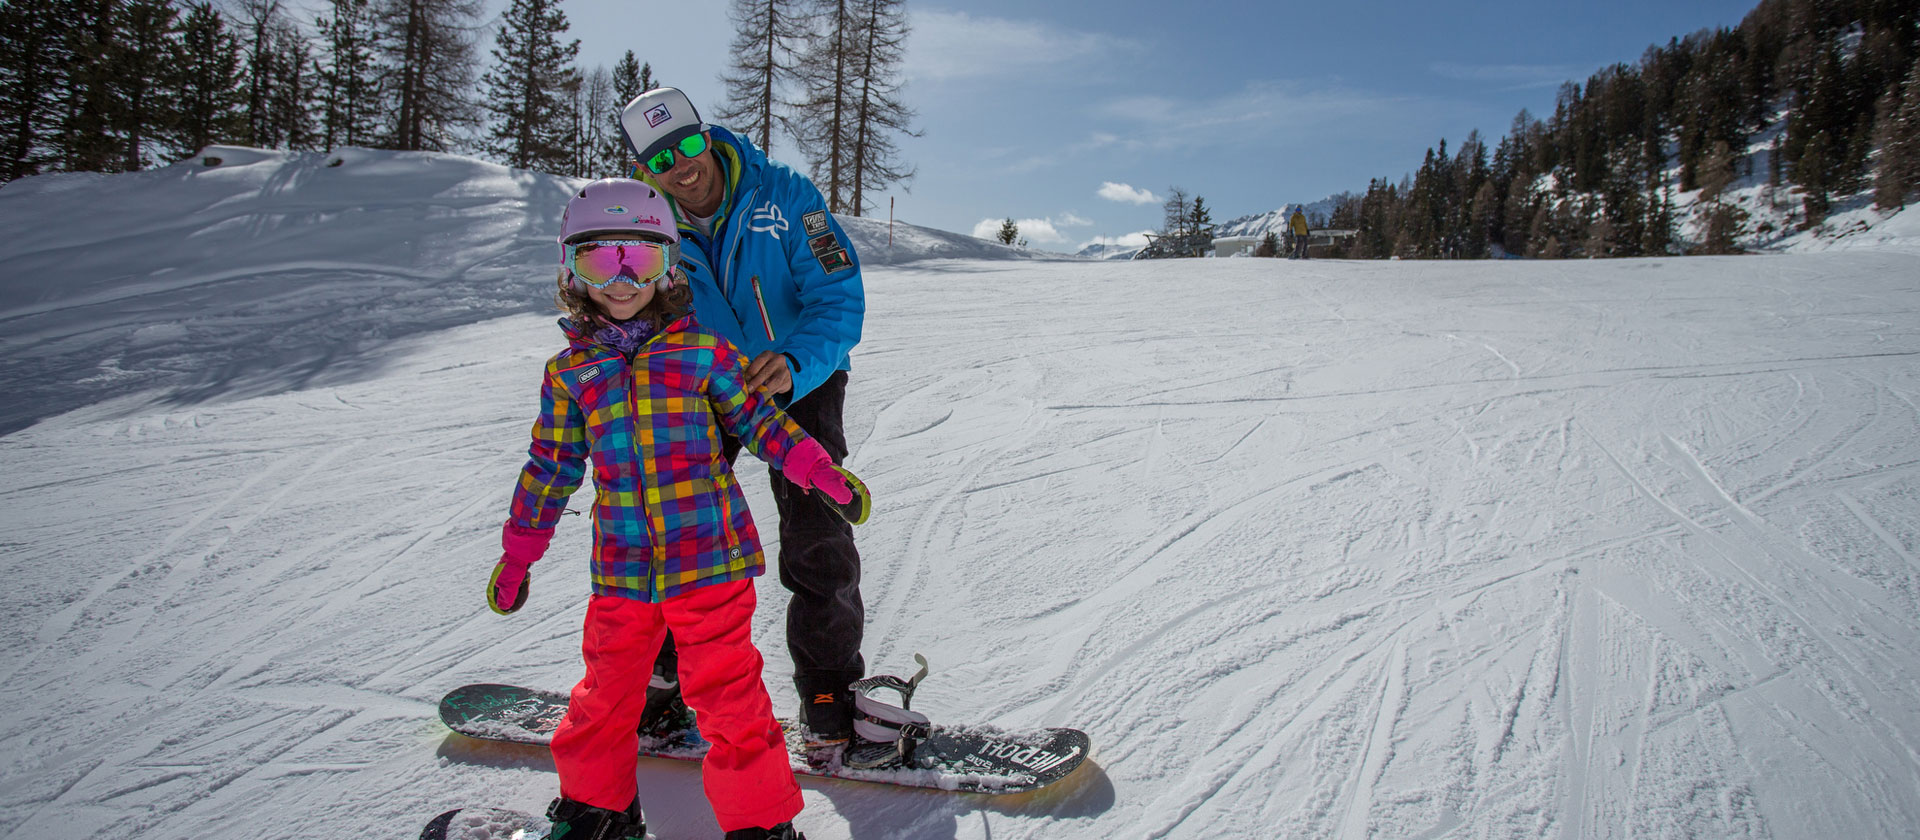 Holidays skiing with kids - Kinderland in Val di Sole - Trentino